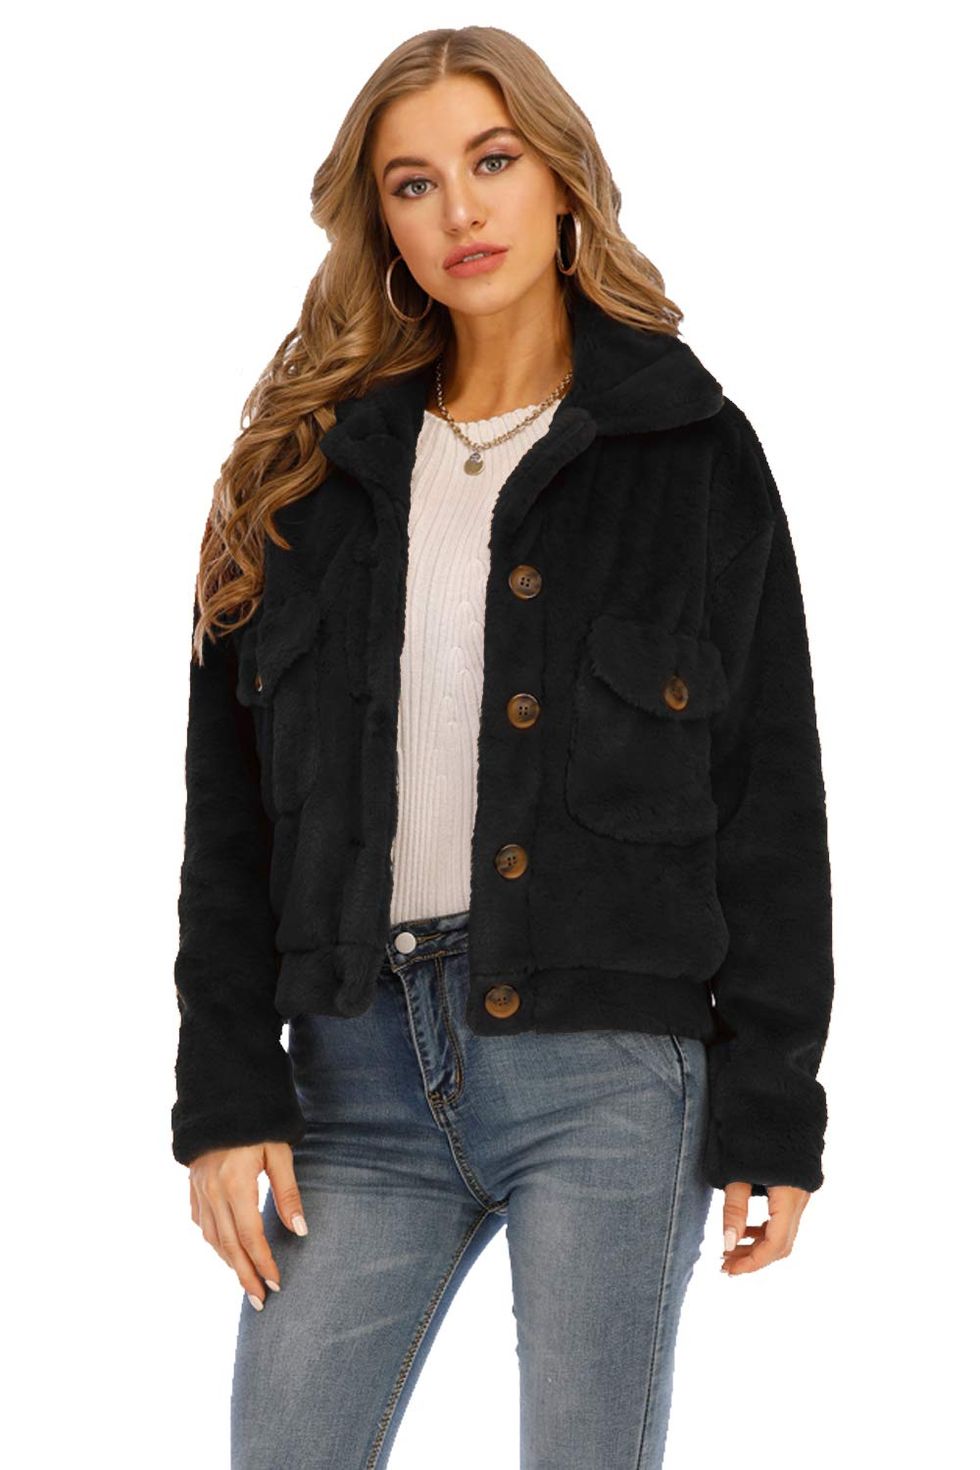 Essentials Women's Utility Jacket Is Perfect for Fall